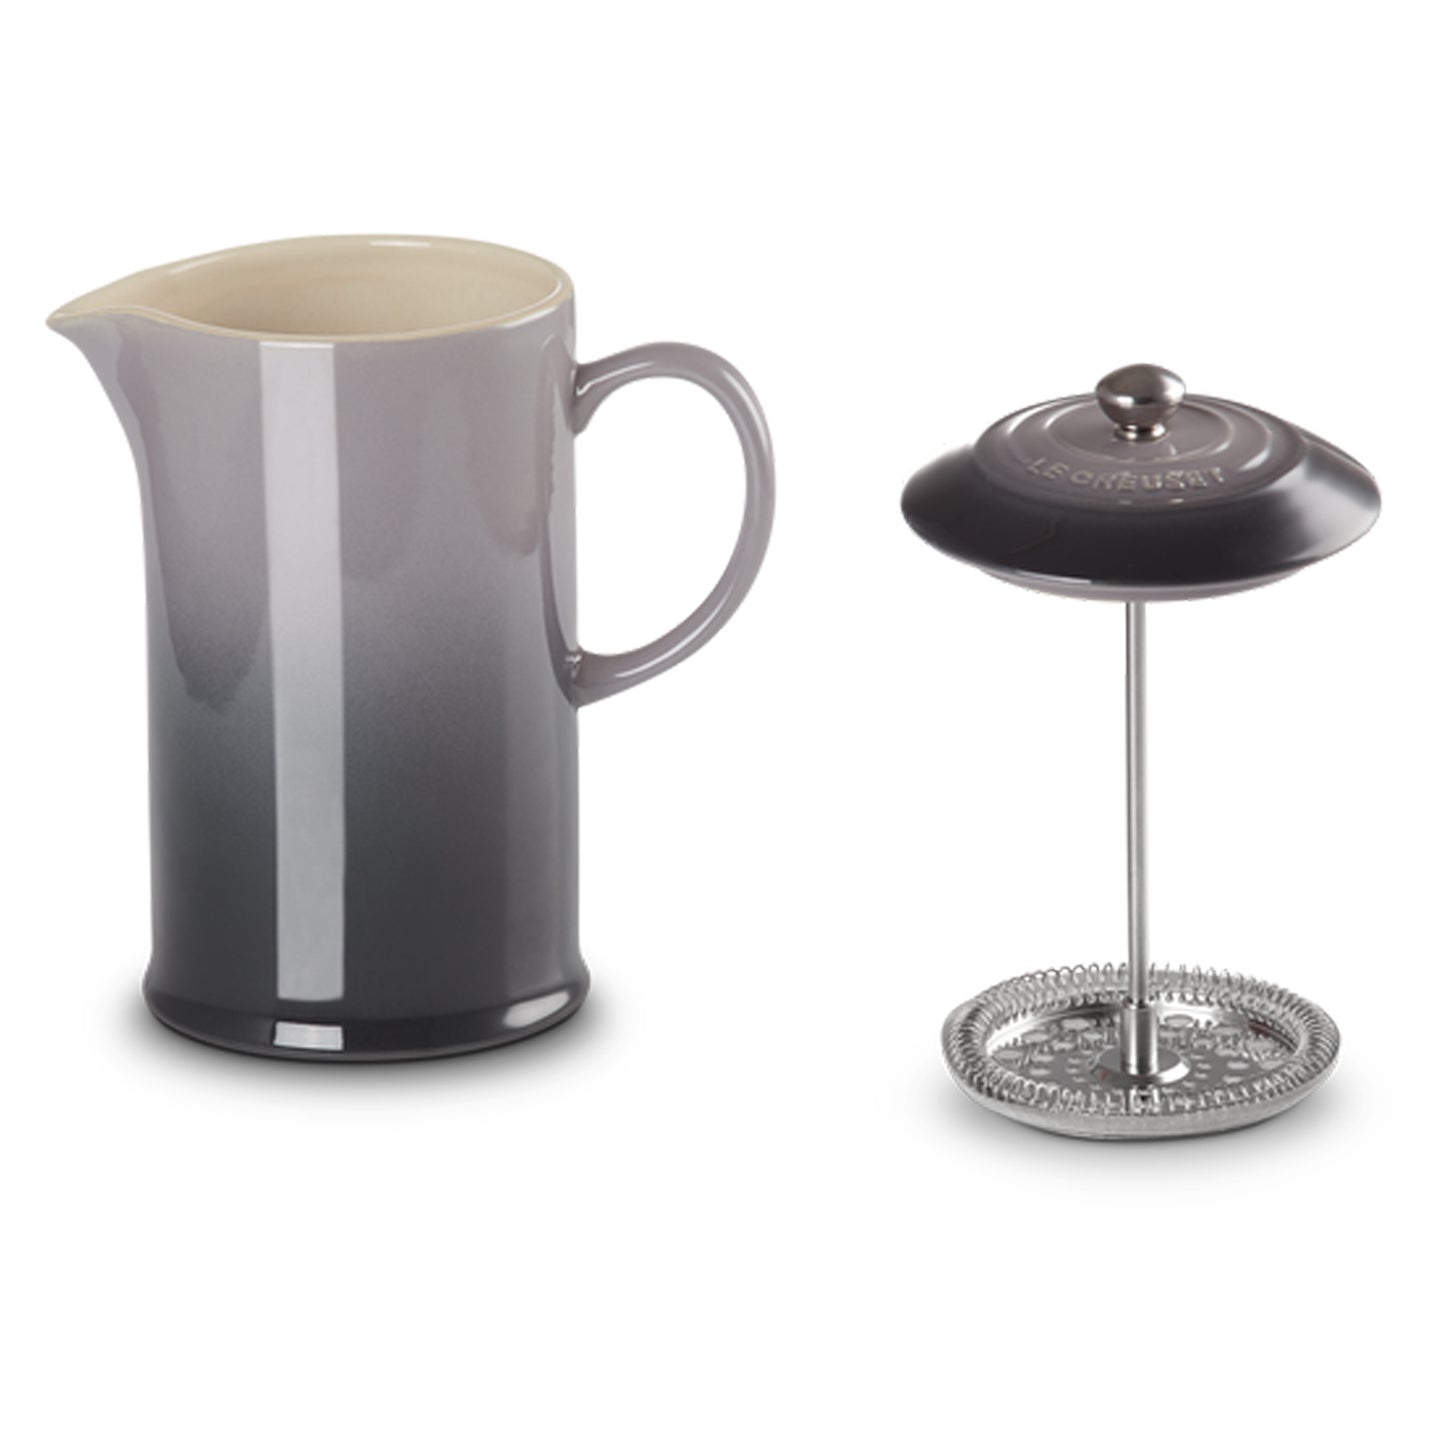 grey and black french press from Le Creuset with plunger and lid